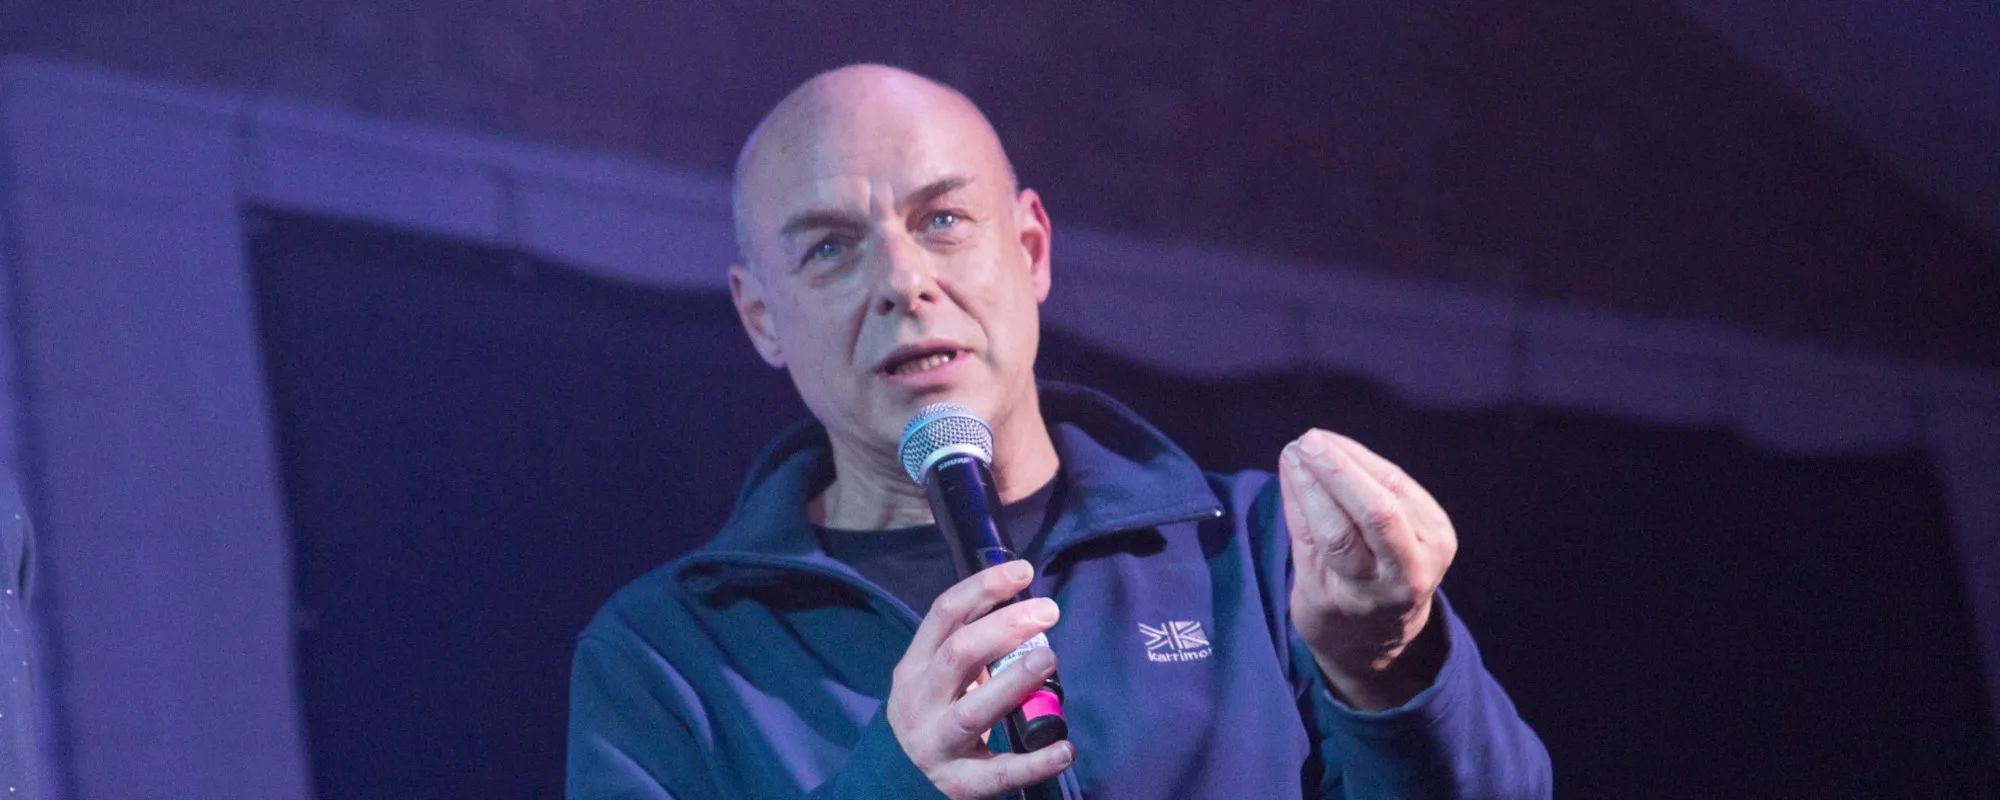 Brian Eno’s New Song “We Let It In” Features Vocals from His Daughter